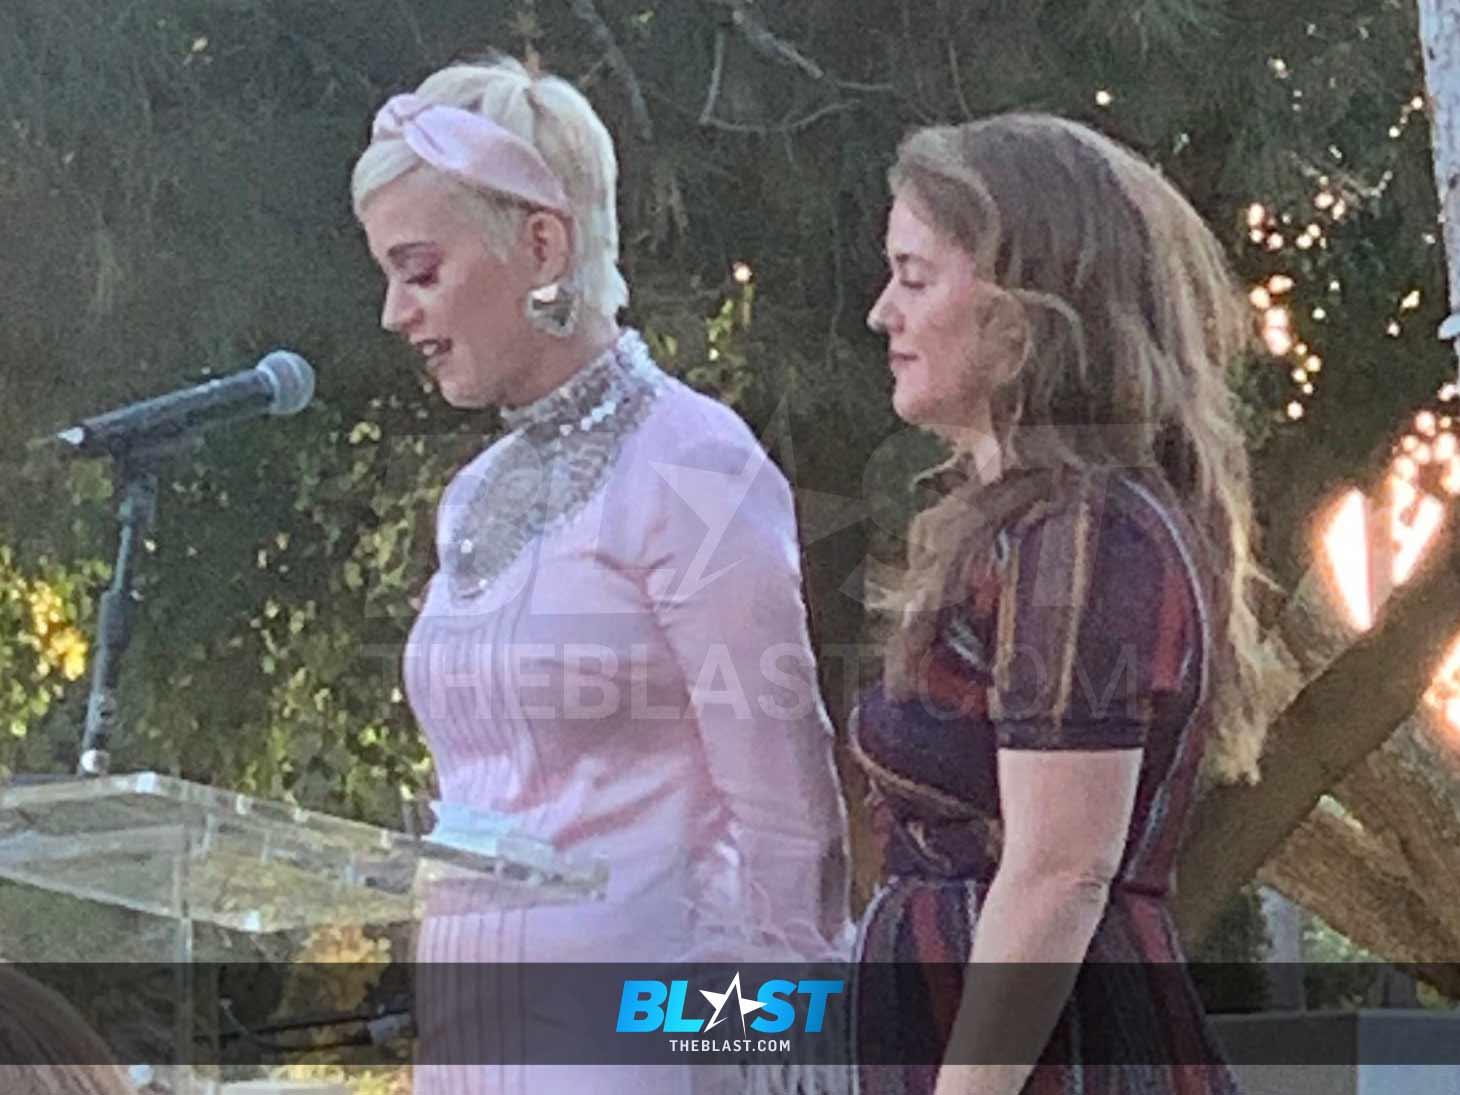 Katy Perry Delivers Touching Speech at the Funeral of Music Exec and ‘Big Sister’ Angelica Cob-Baehler